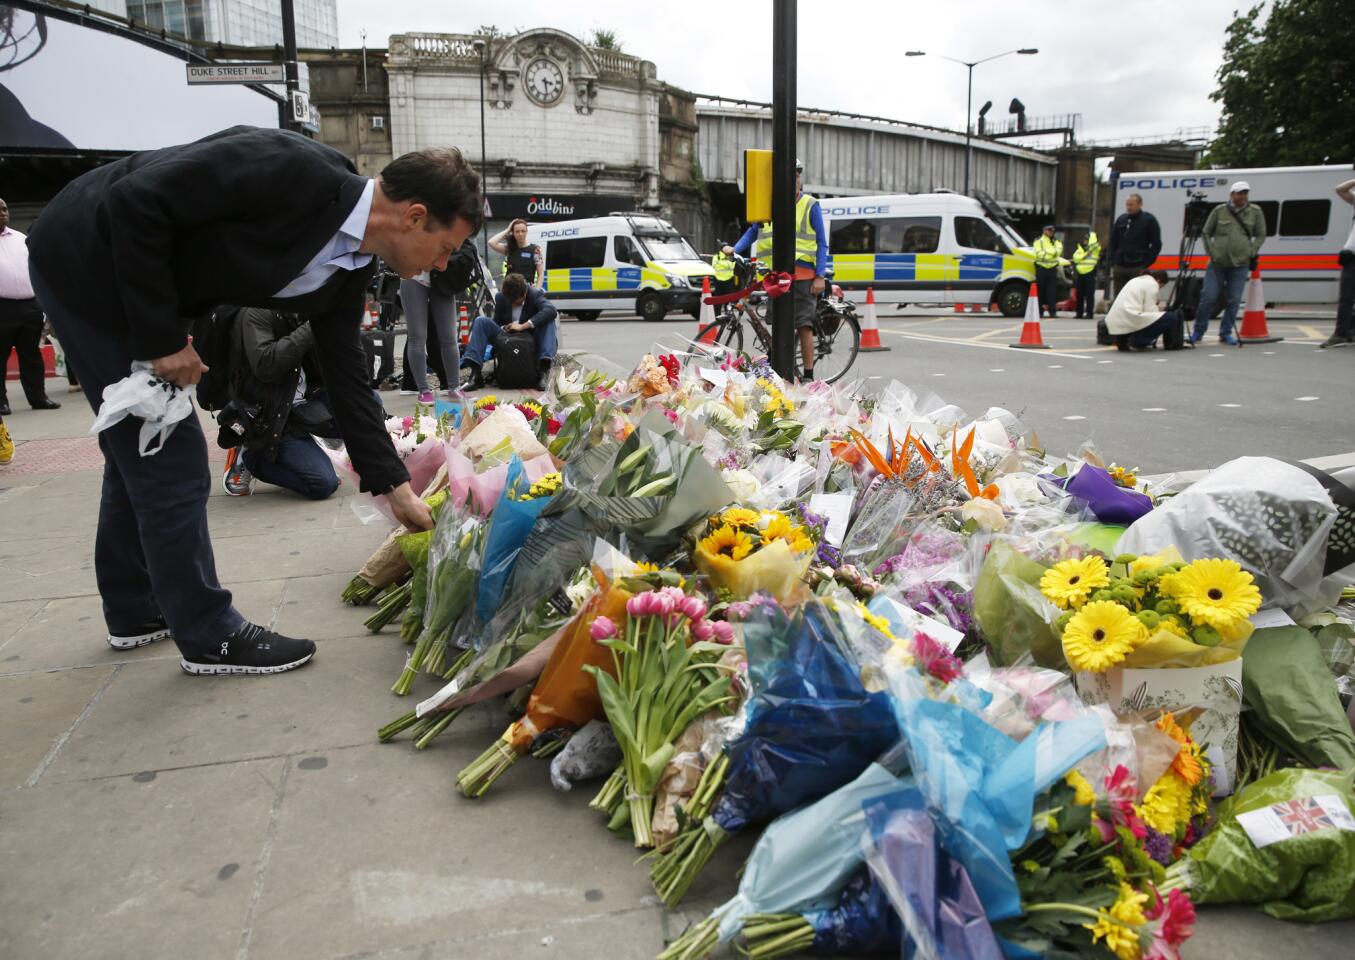 A man leaves flowers at a tribute in the London Bridge area on June 5.